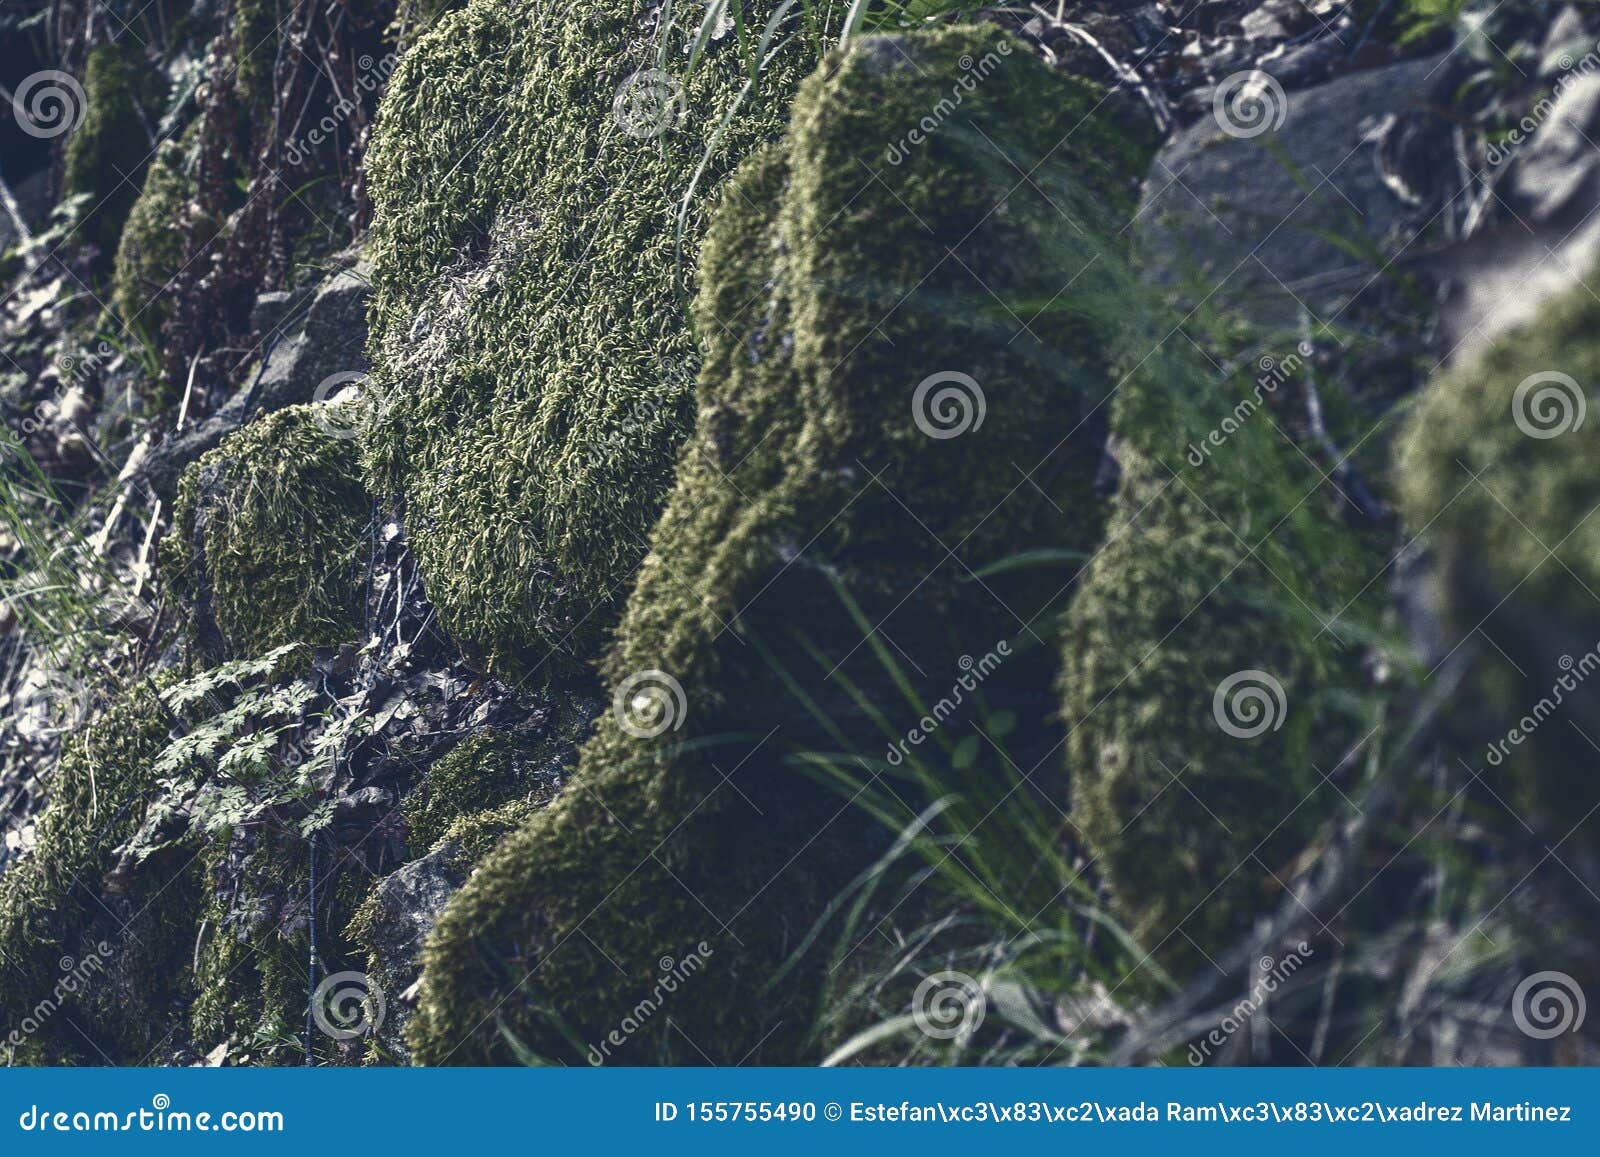 moss and vegetation in rocks in the mountain